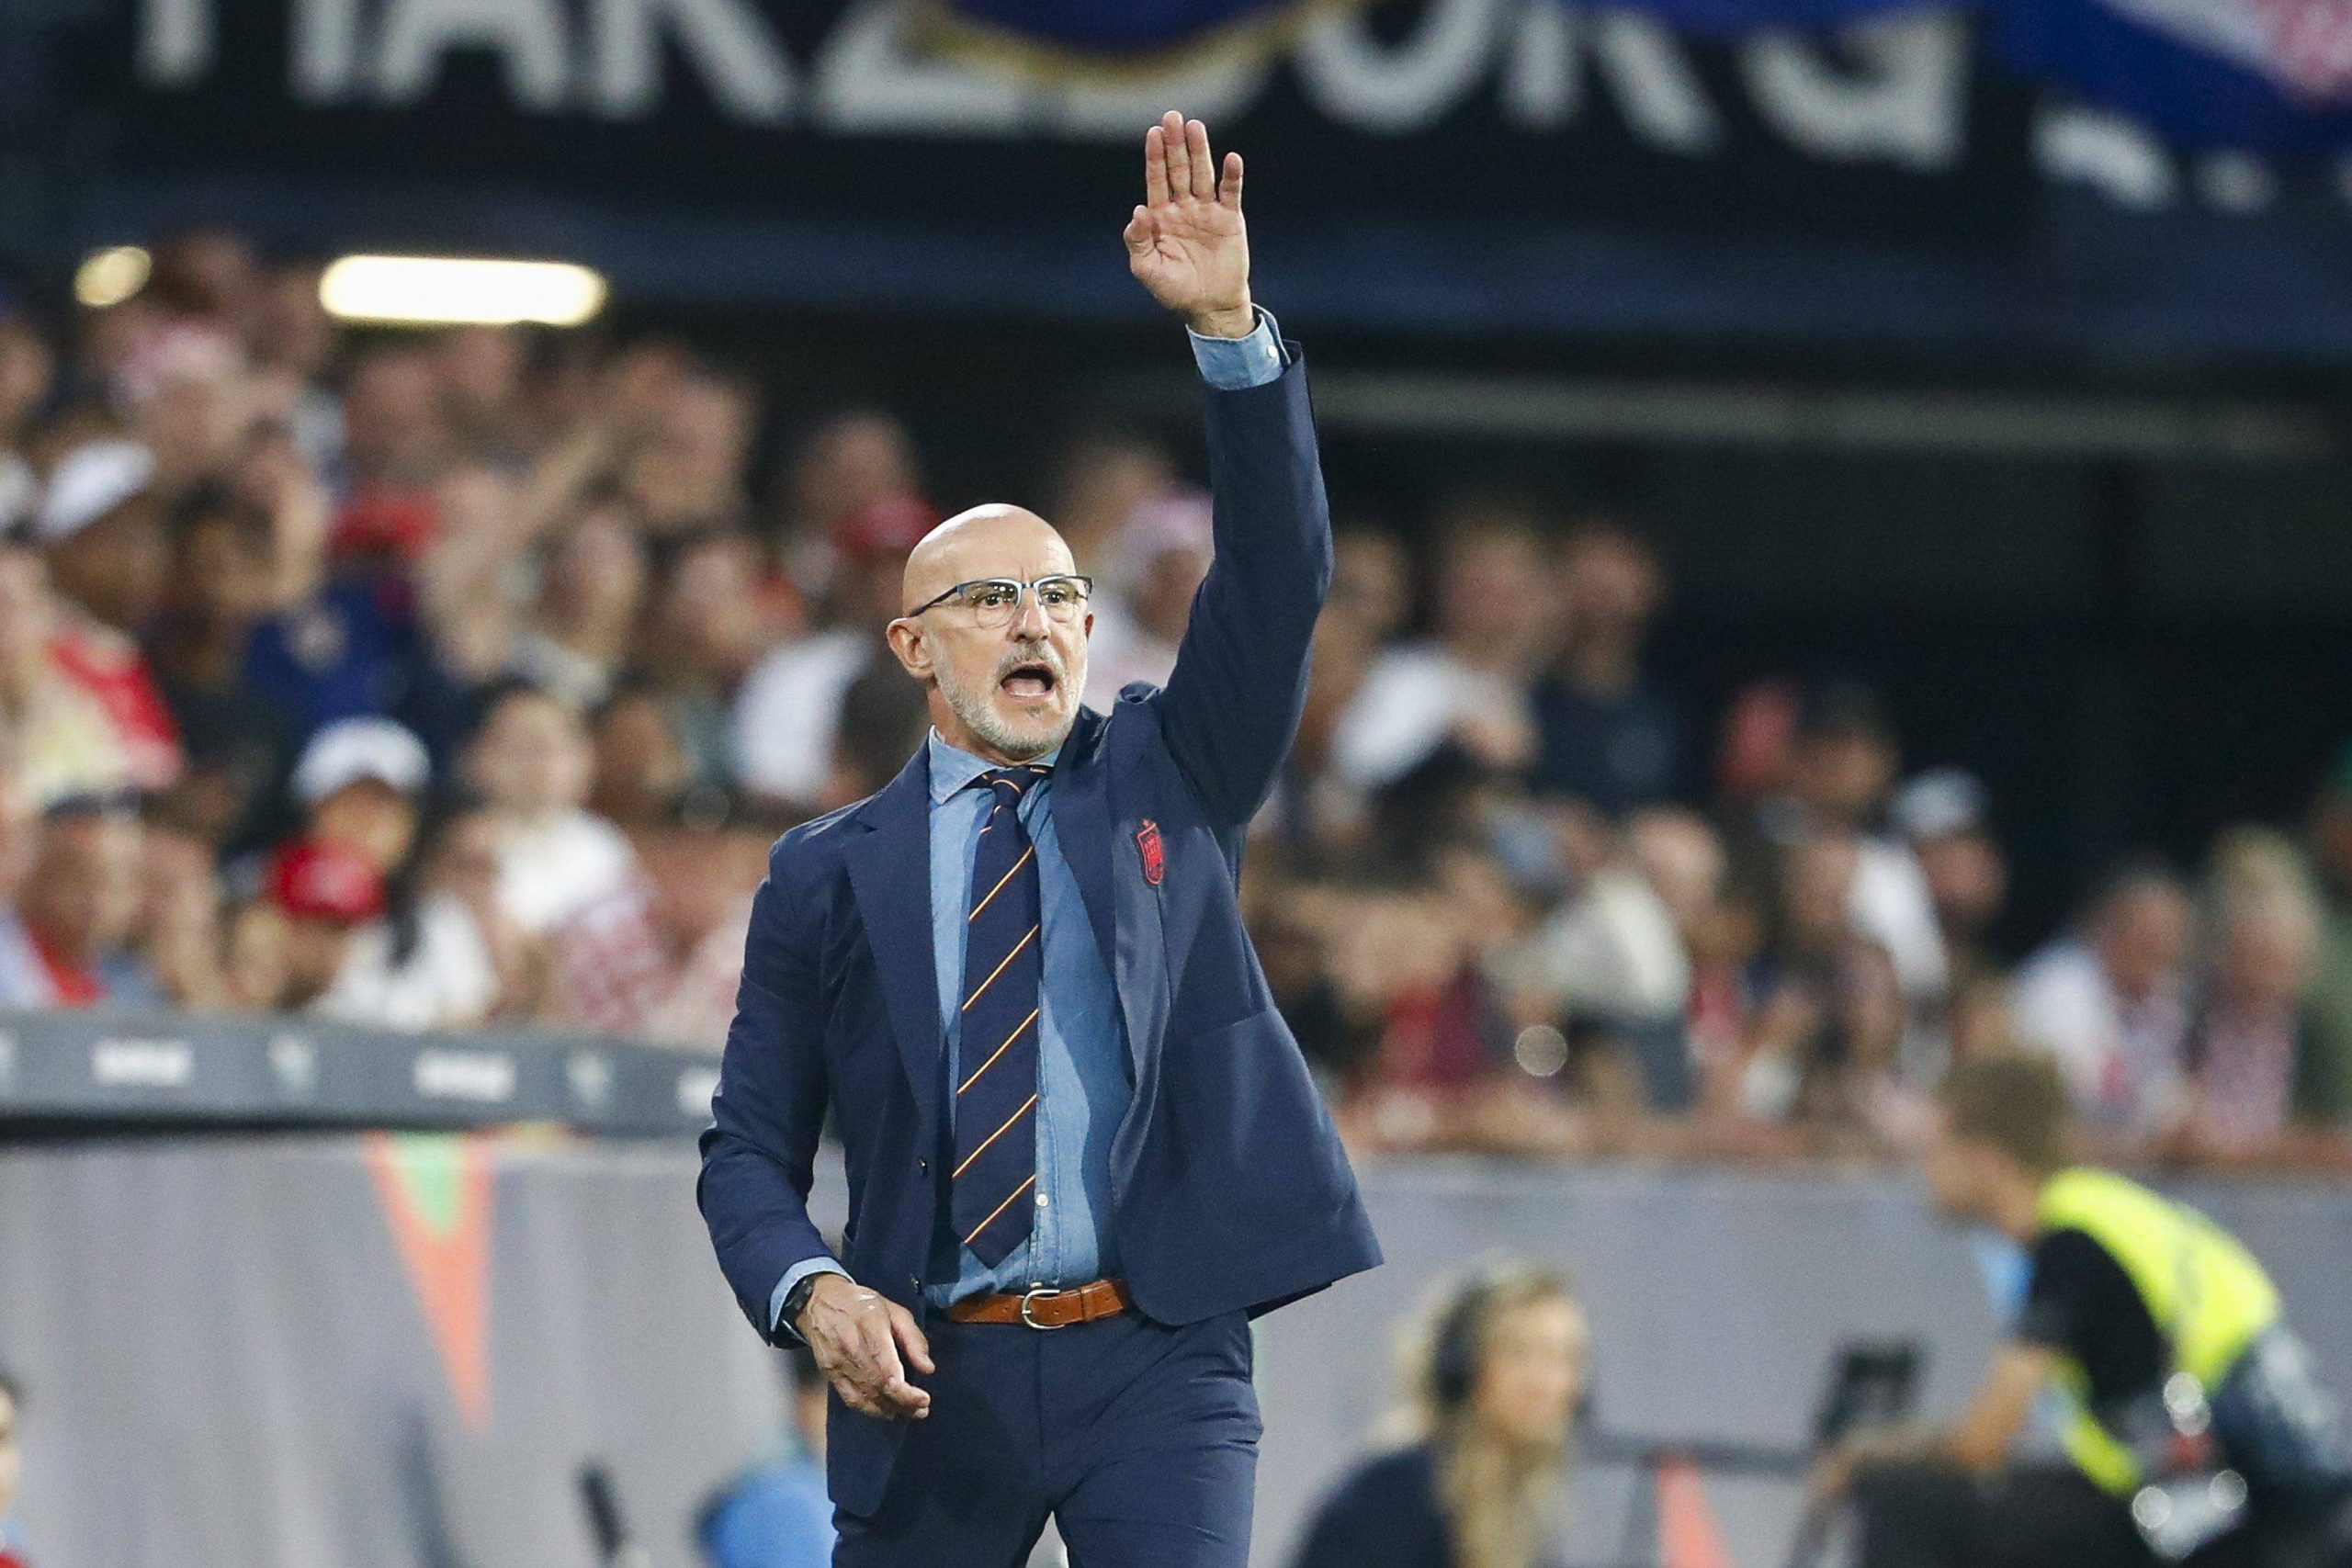 Spain's men's football boss says sorry but will not resign over applauding speech by controversial World Cup kisser Luis Rubiales